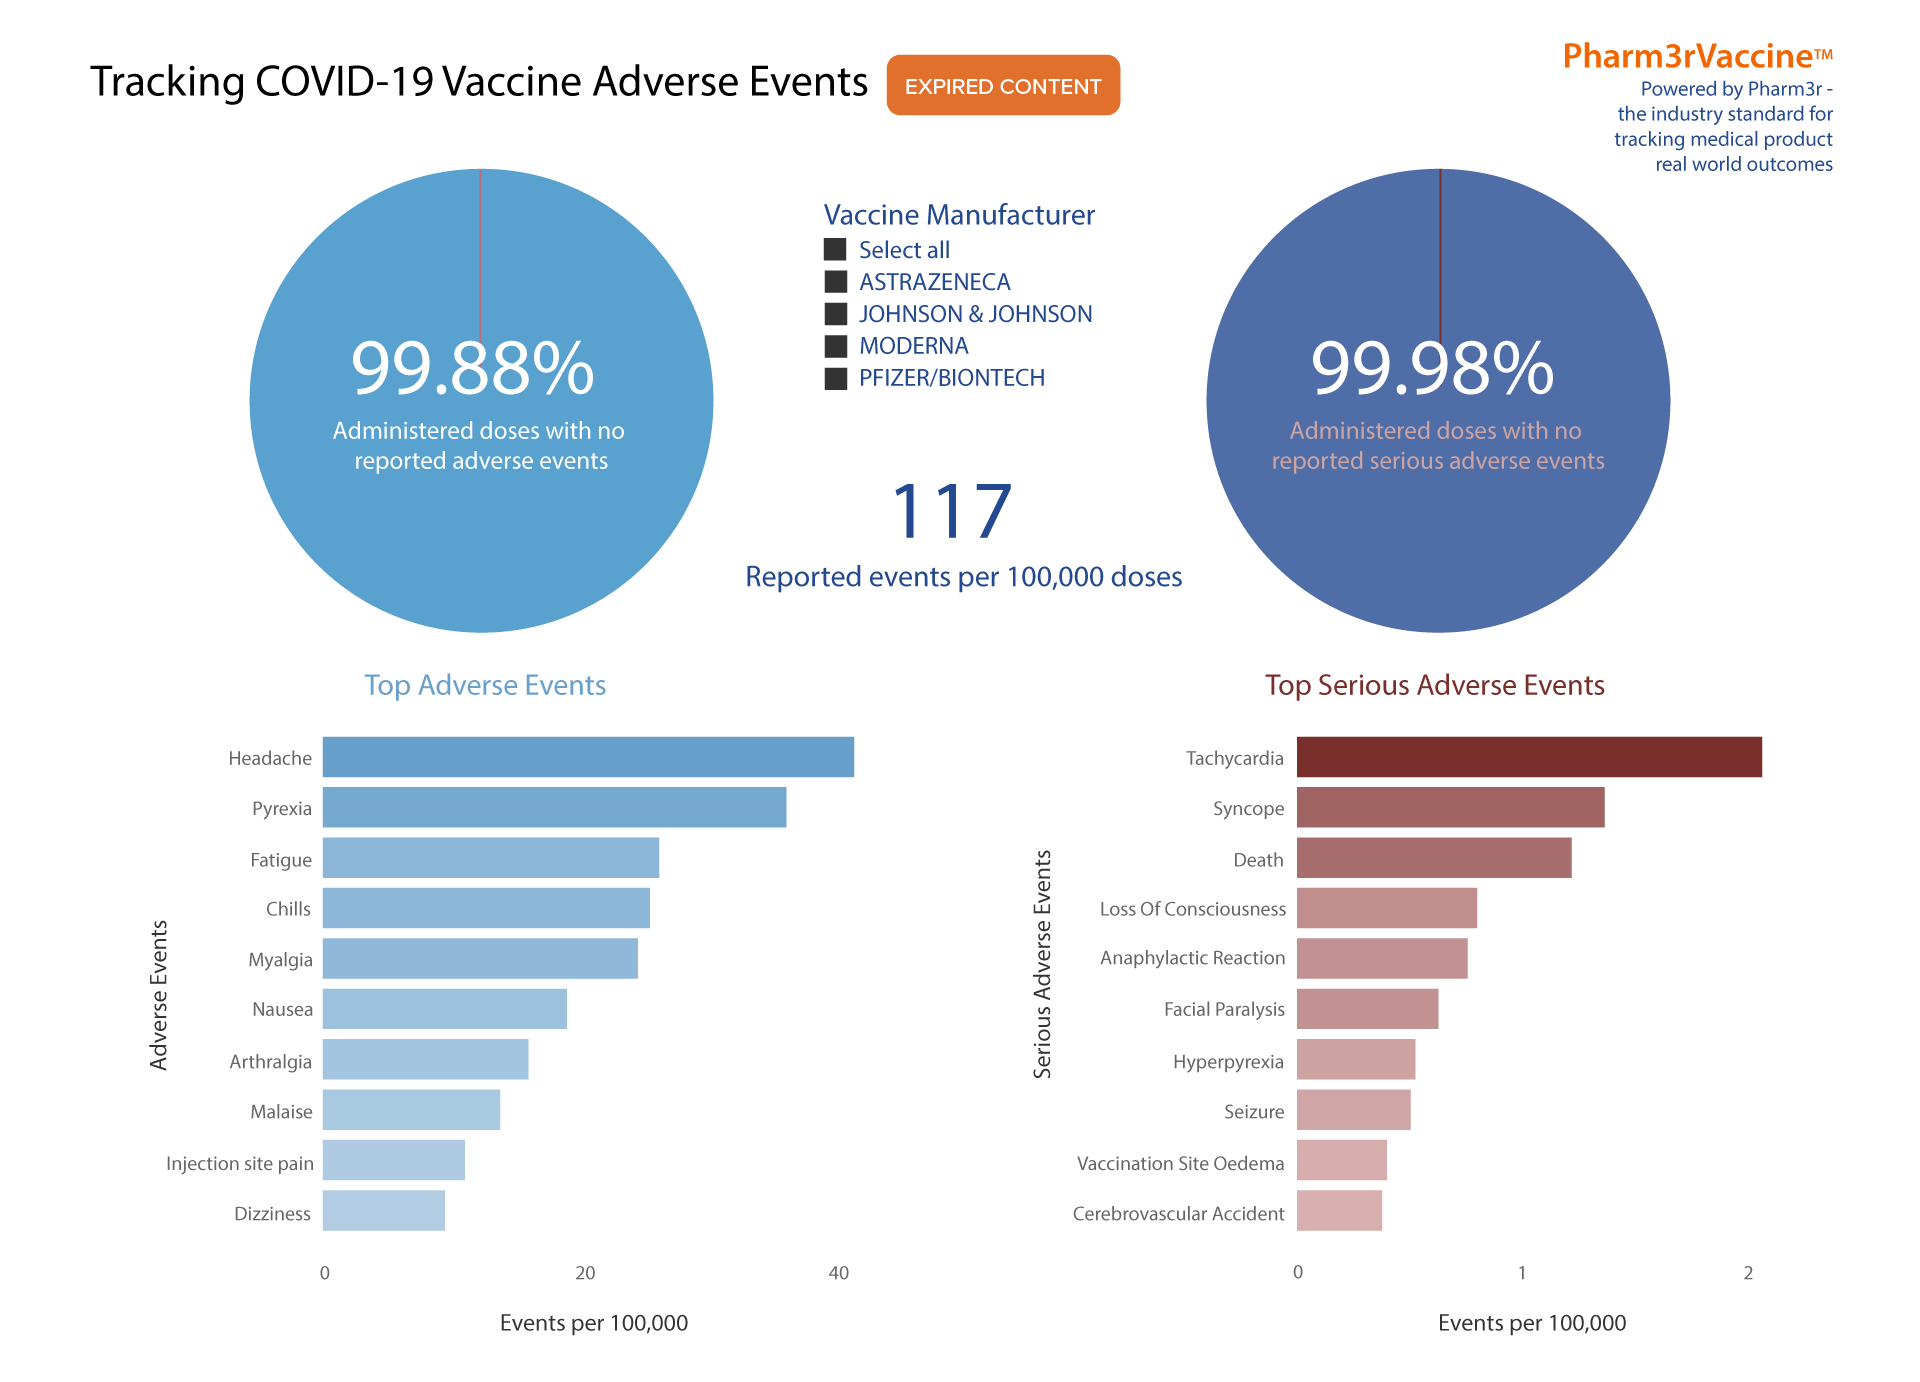 Pharm3rVaccine Tracking COVID-19 Adverse Events Update May 2021